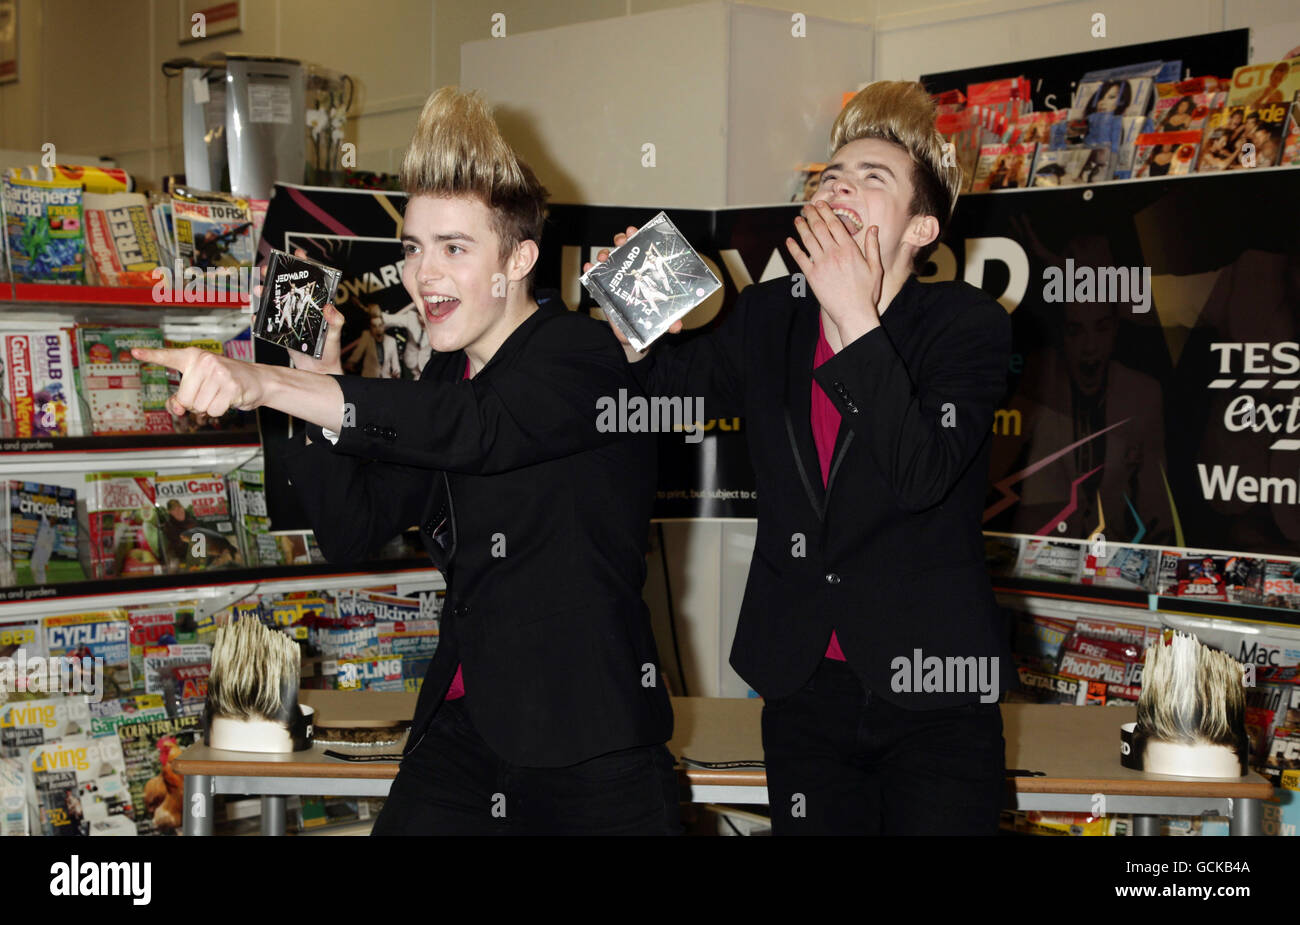 John and Edward (left) Grimes, better known as Jedward, during an instore signing for their album, at Tesco Extra in Brent Park, Wembley, north London. Stock Photo